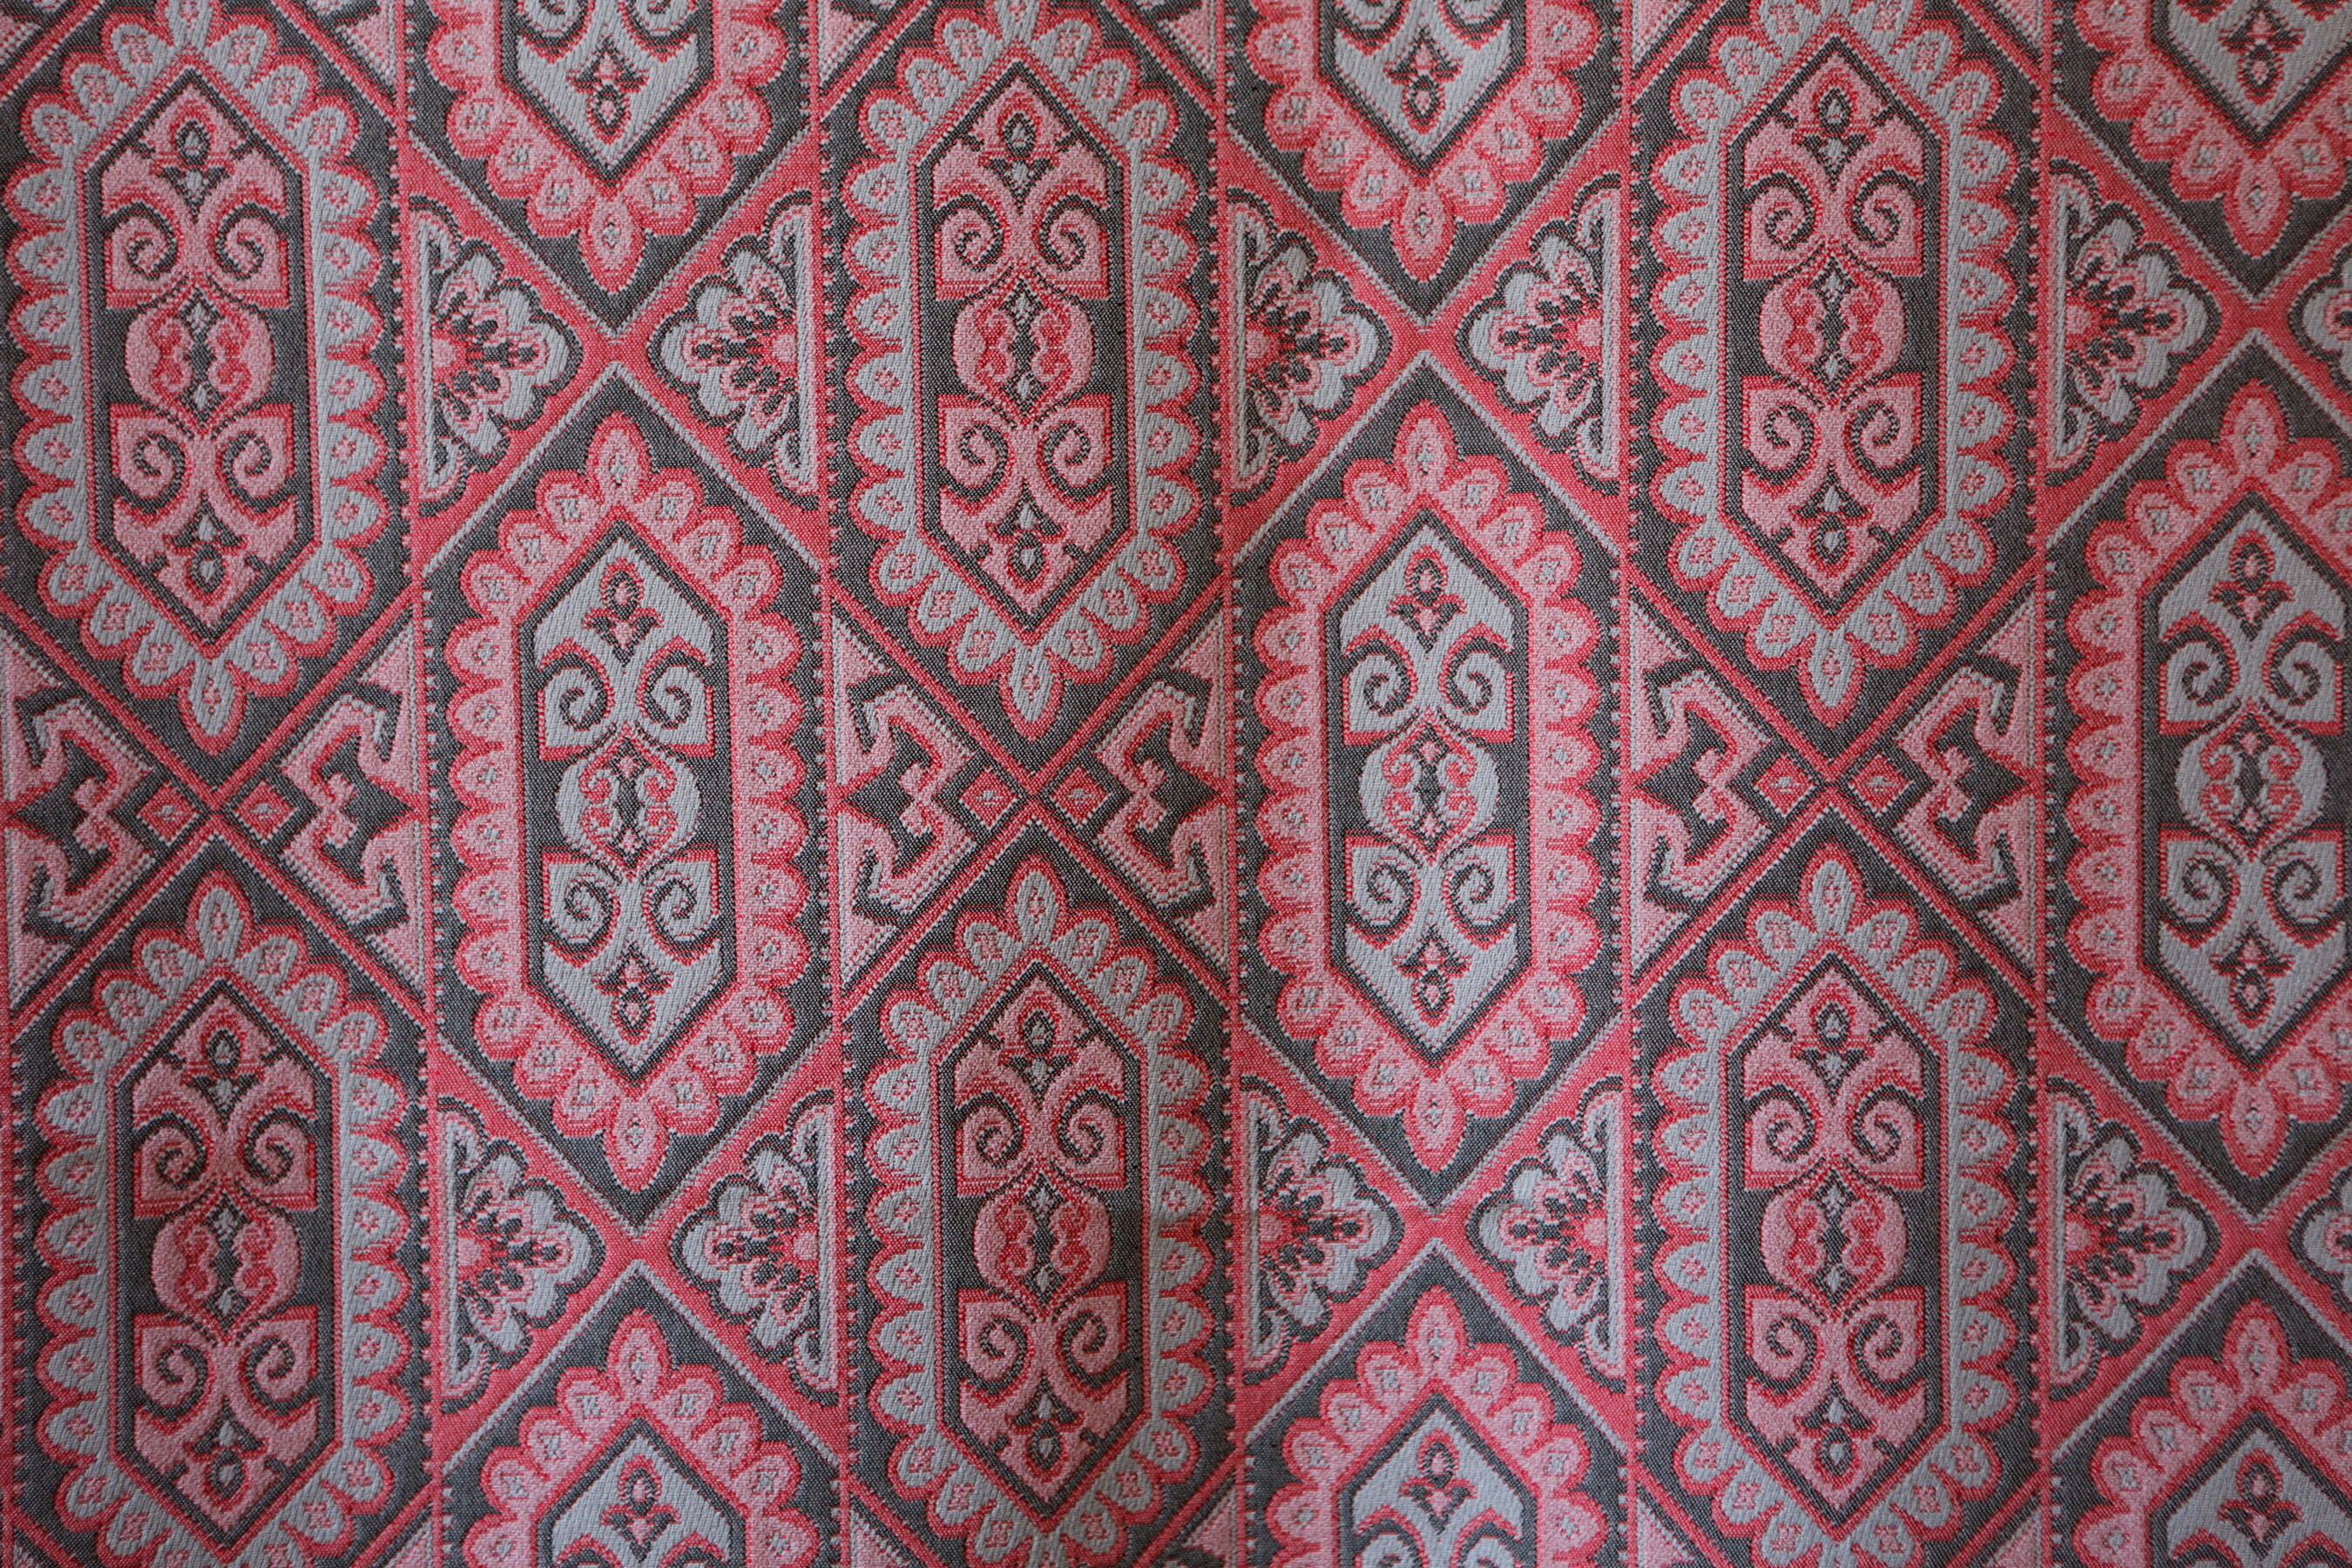 Pink & Gray Synthetic Blend Lightweight Fabric With Diamond Oblong Geometric Pattern - Vintage 70's